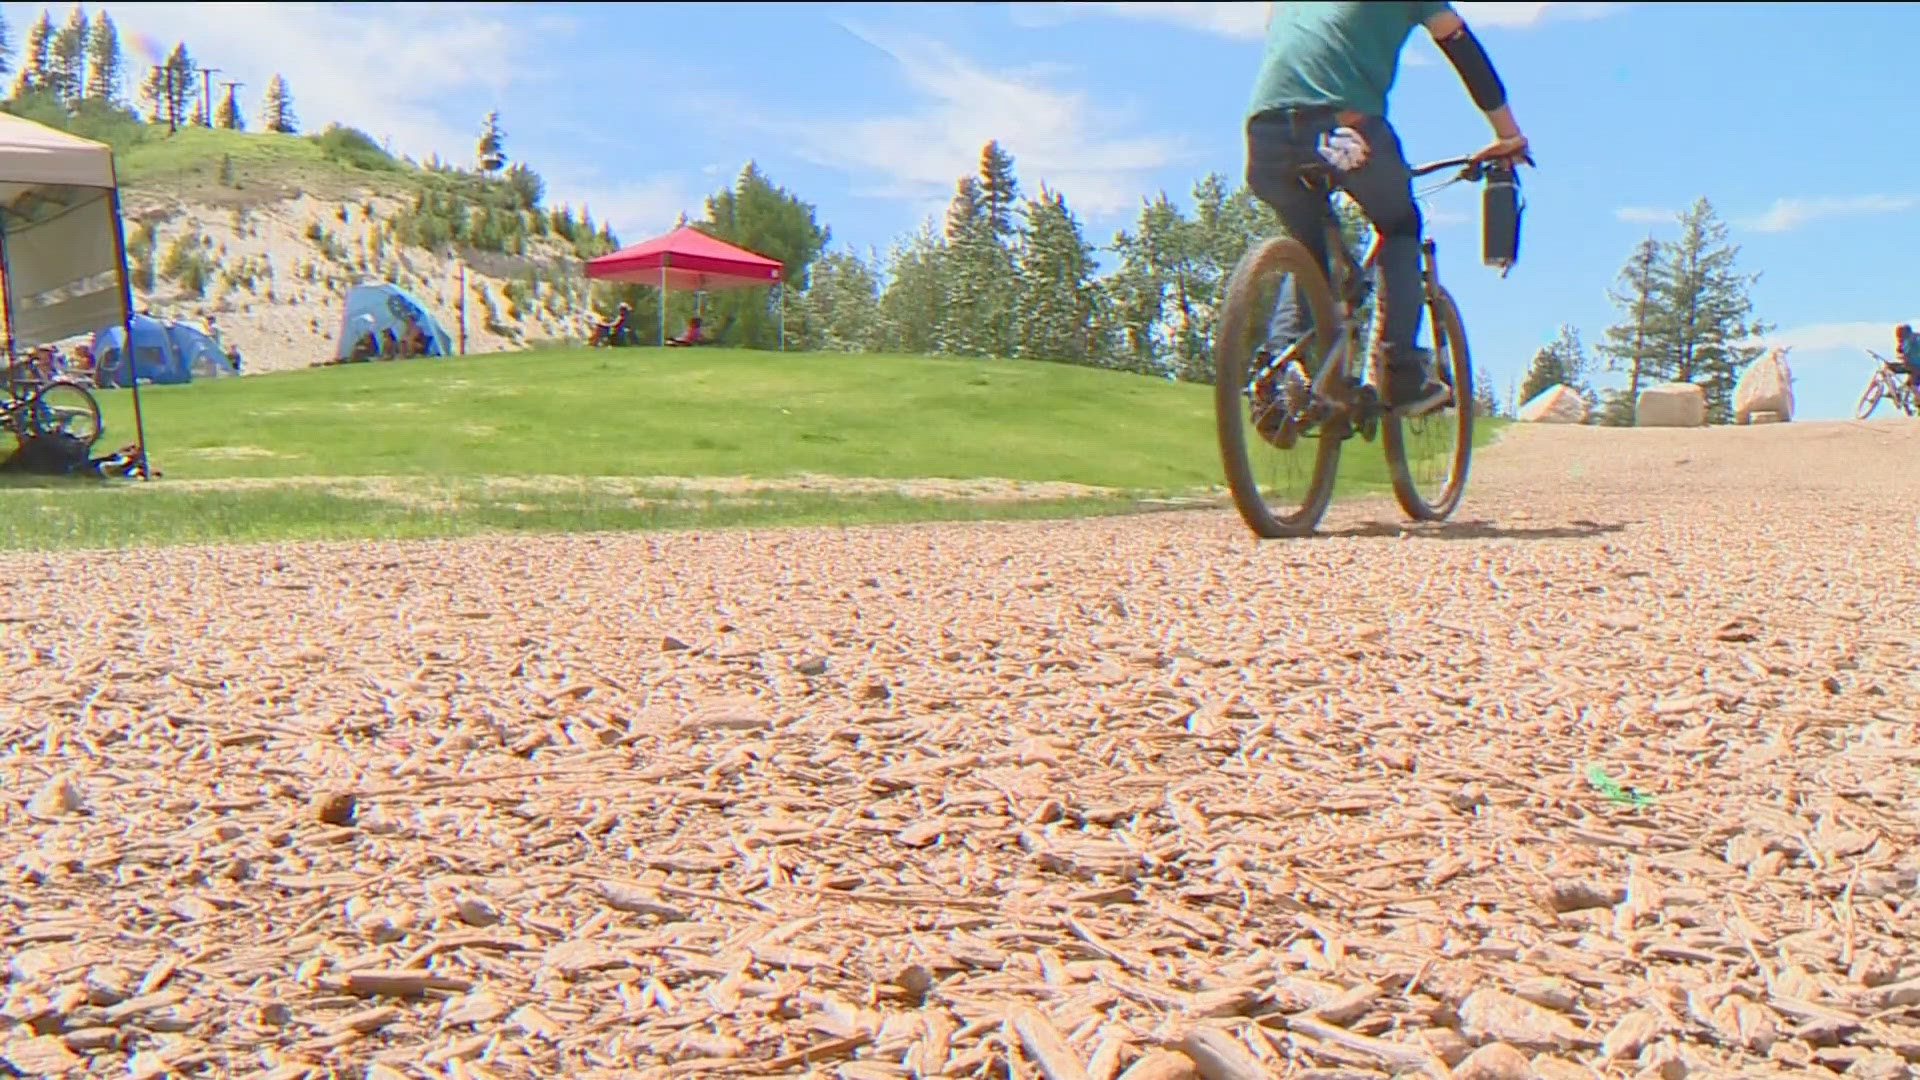 Bogus Basin summer activities will open and operate daily, unlike last year.